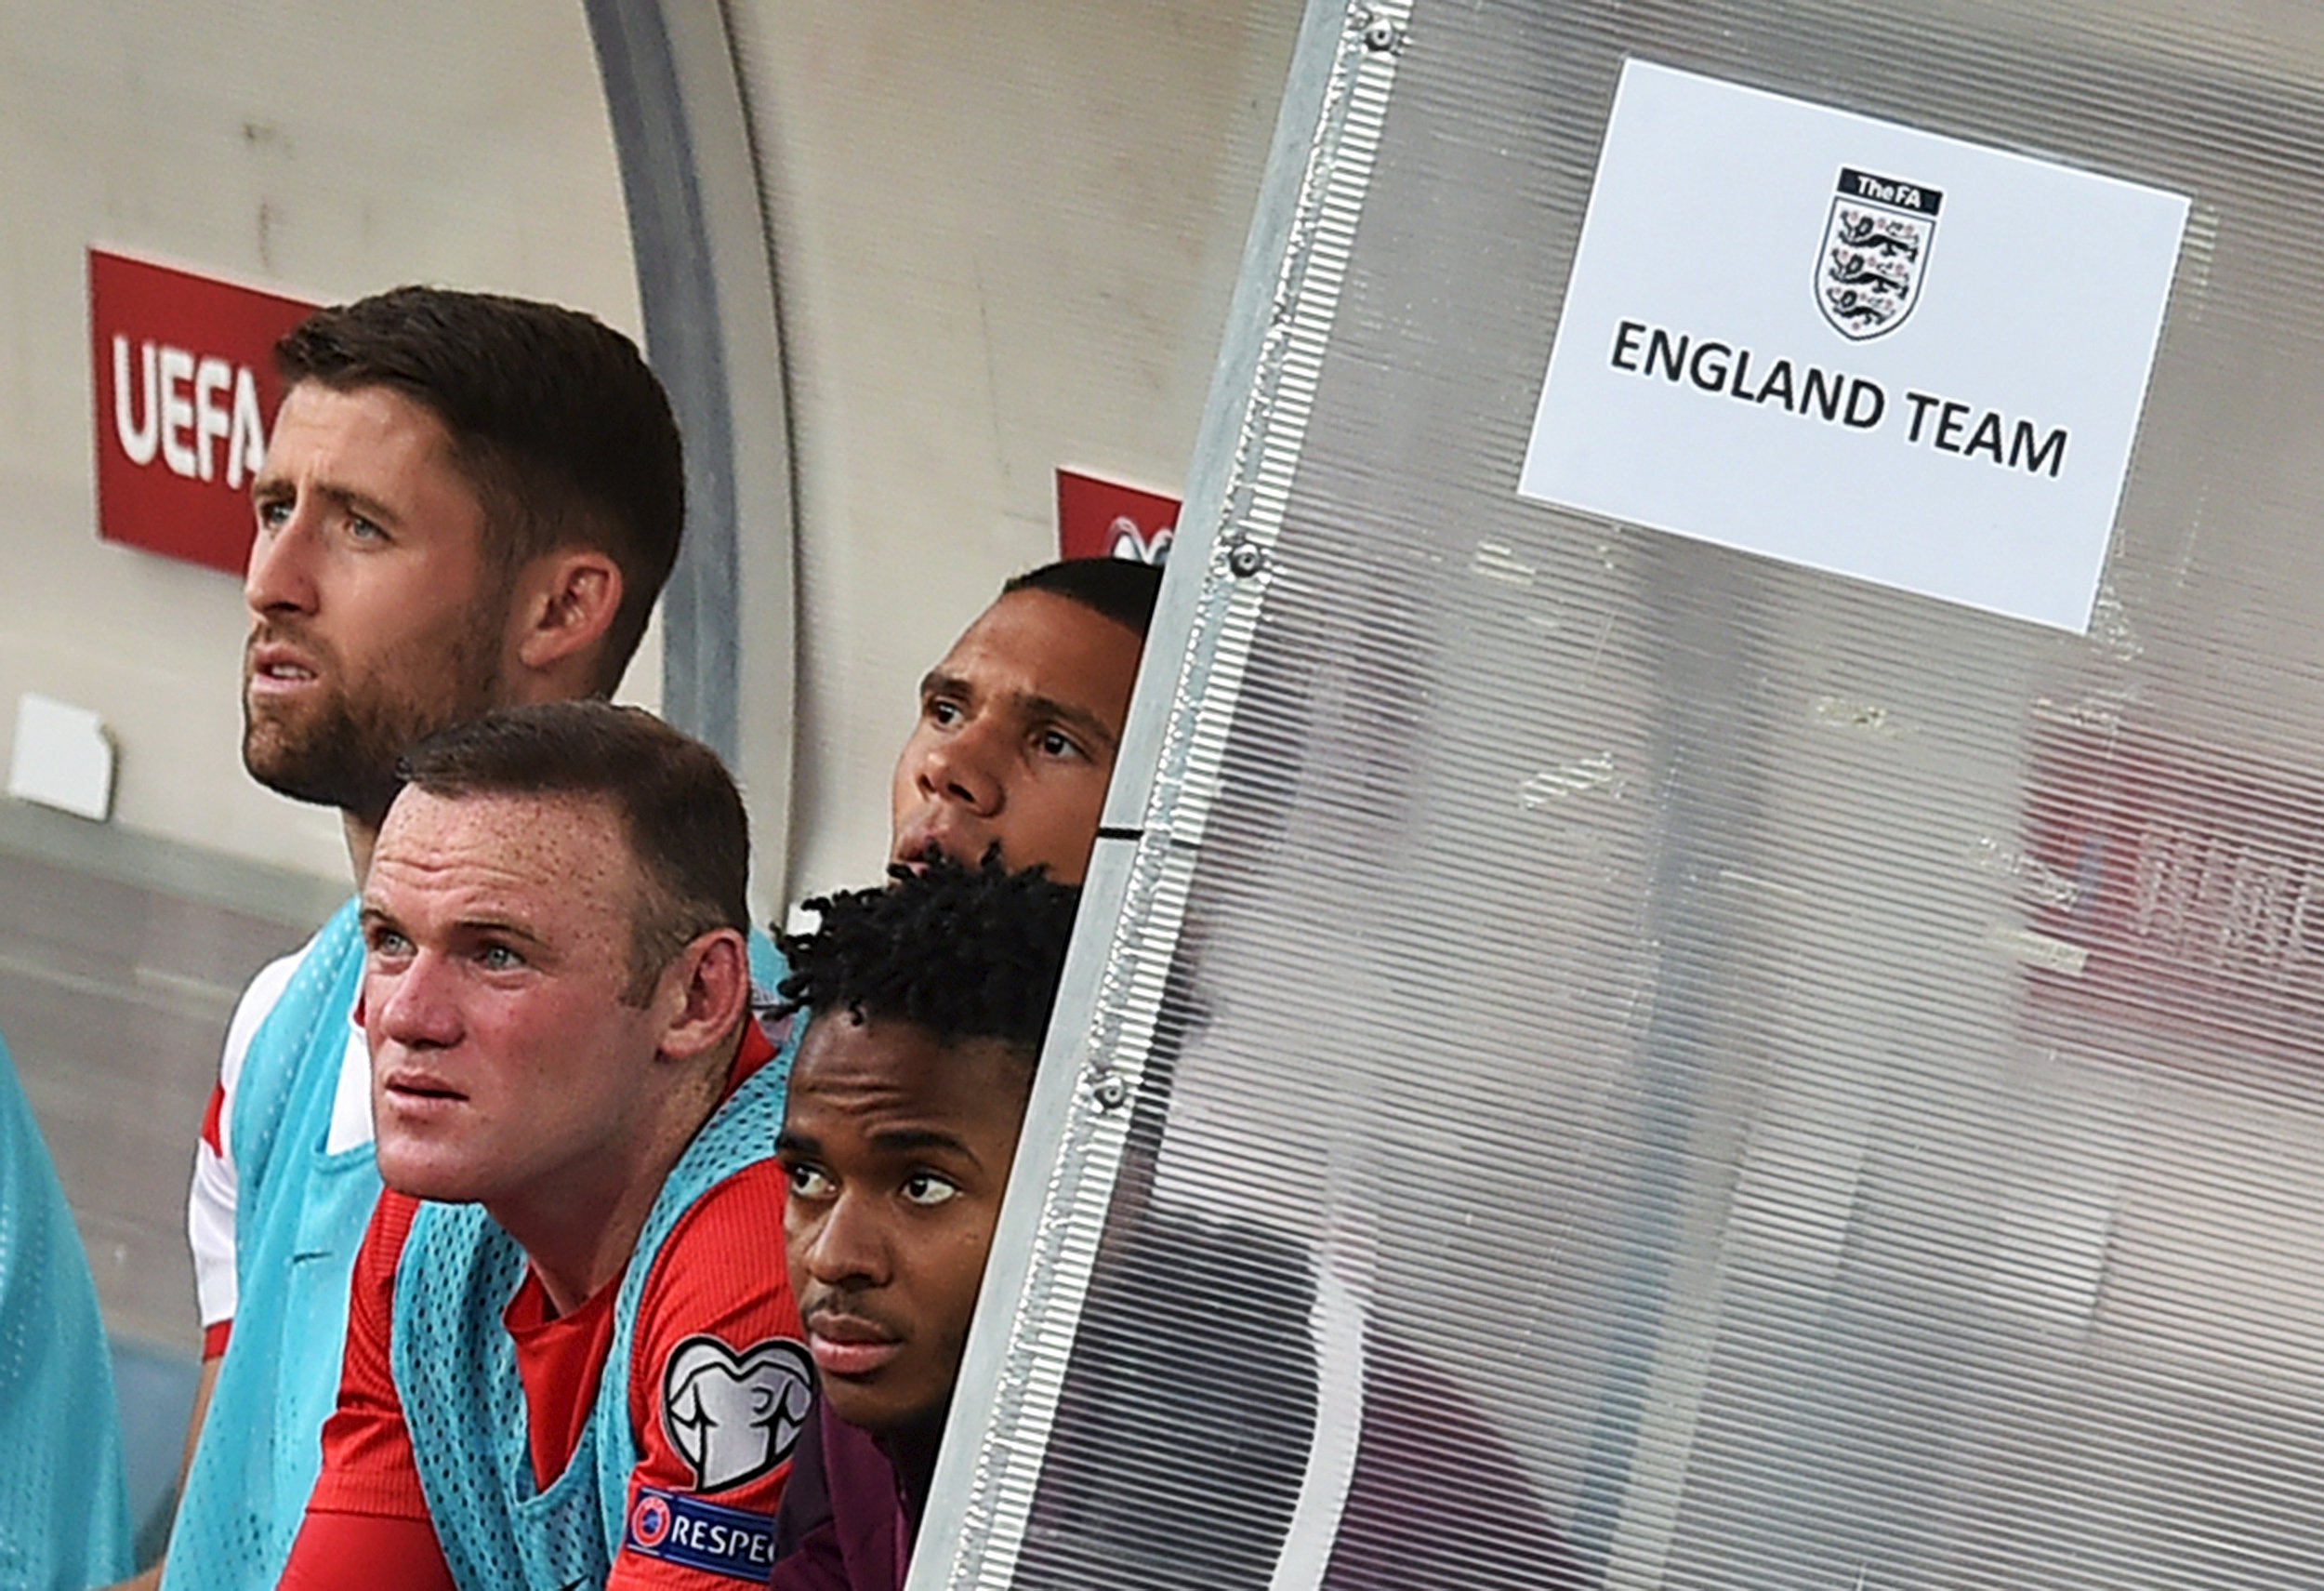 England's Wayne Rooney (2nd L) sits in the bench after being substituted during their Euro 2016 qualifying soccer match against San Marino at the Olympic stadium in Serravalle, San Marino, September 5, 2015. REUTERS/Alberto Lingria